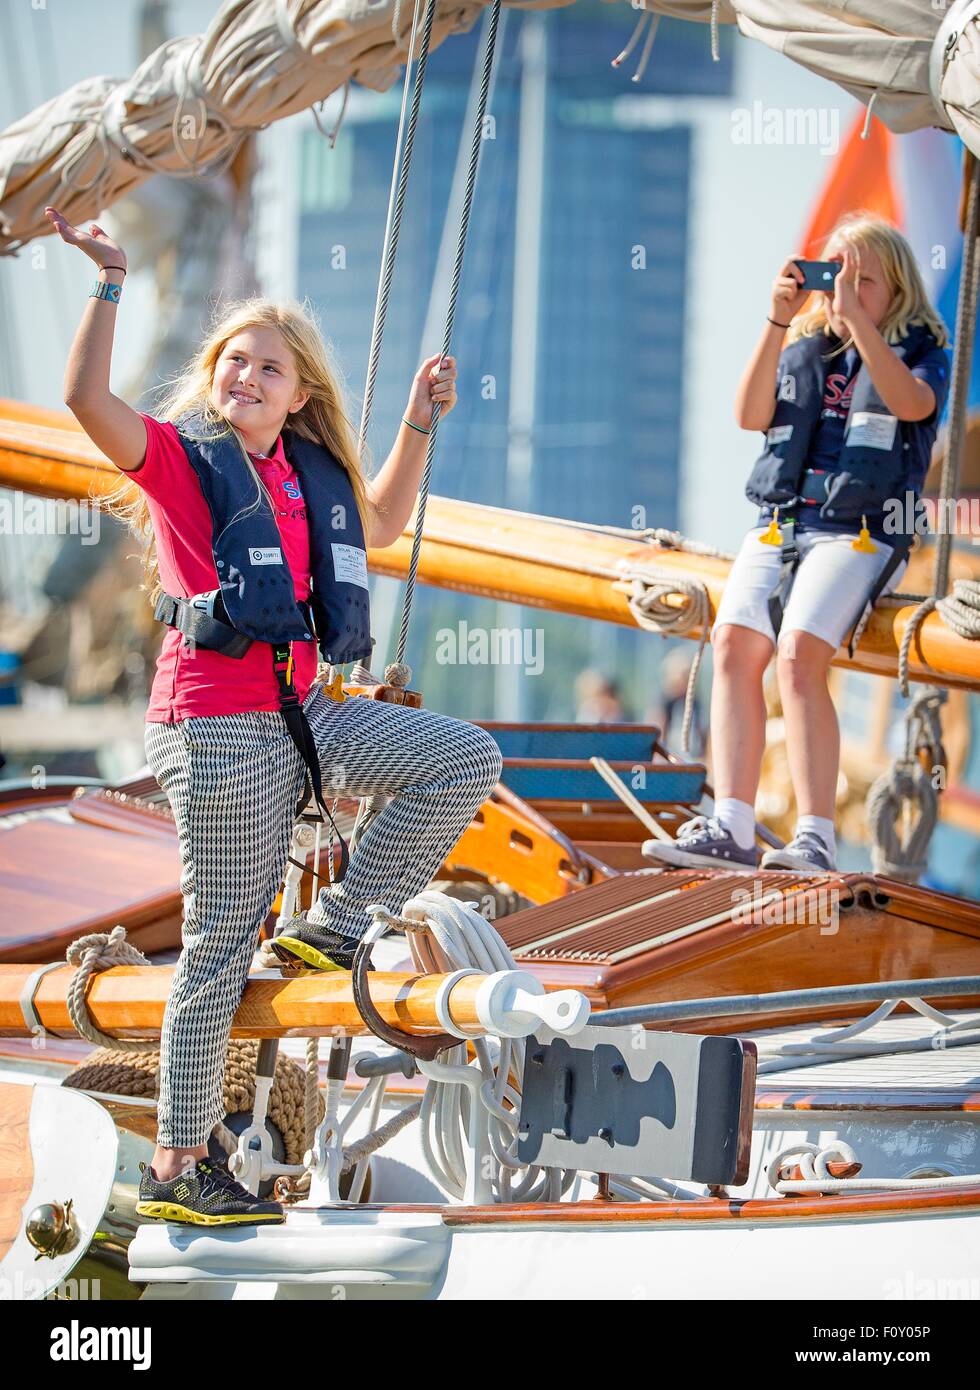 Amsterdam, The Netherlands. 22nd Aug, 2015. Princess Amalia and Countess  Luana during Sail 2015 in Amsterdam, The Netherlands, 22 August 2015.  Photo: Patrick van Katwijk POINT DE VUE OUT - NO WIRE